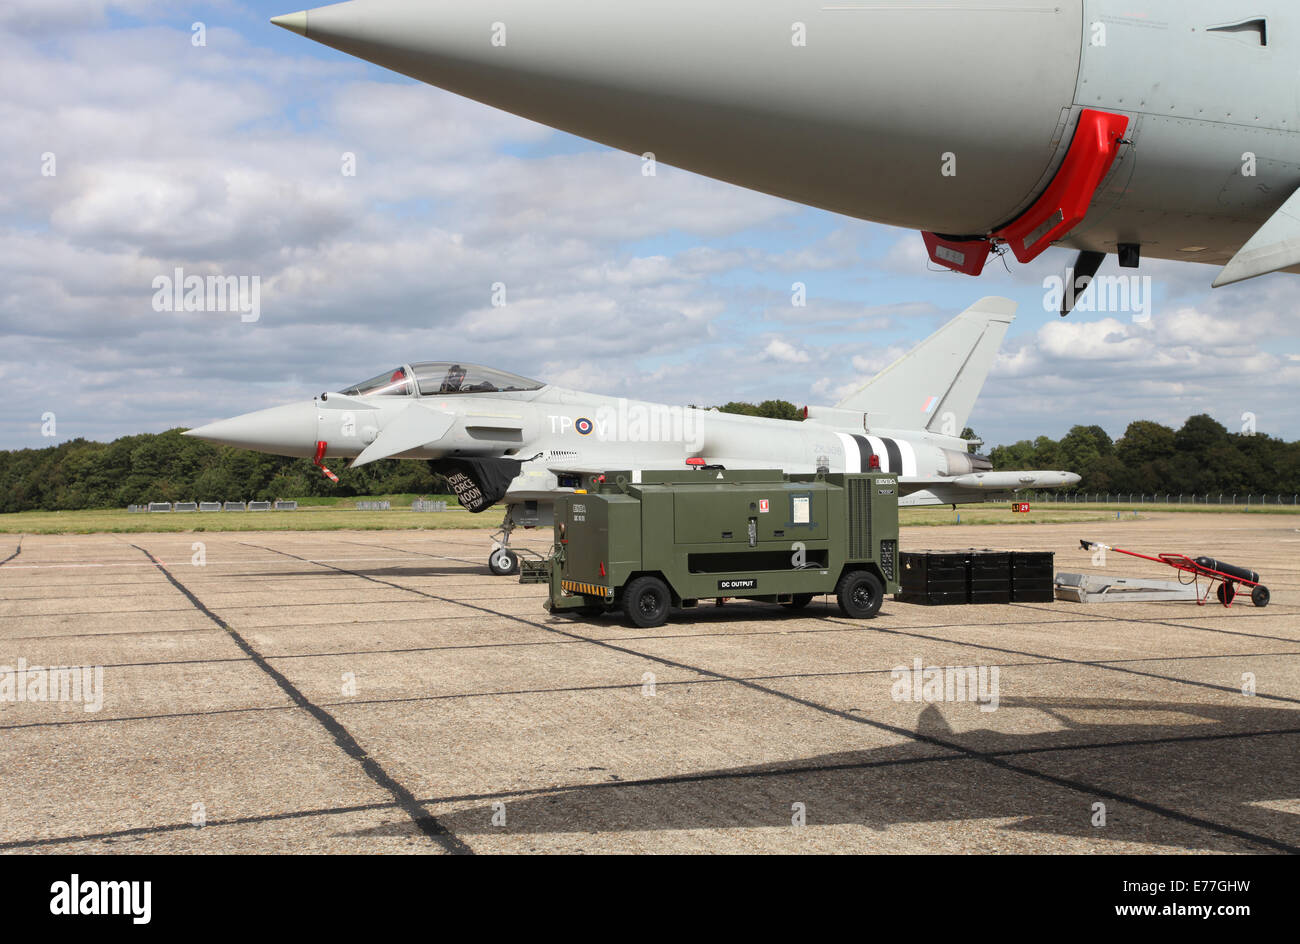 Two Eurofighters parked on the tarmac at Bigging Hill airport Stock Photo